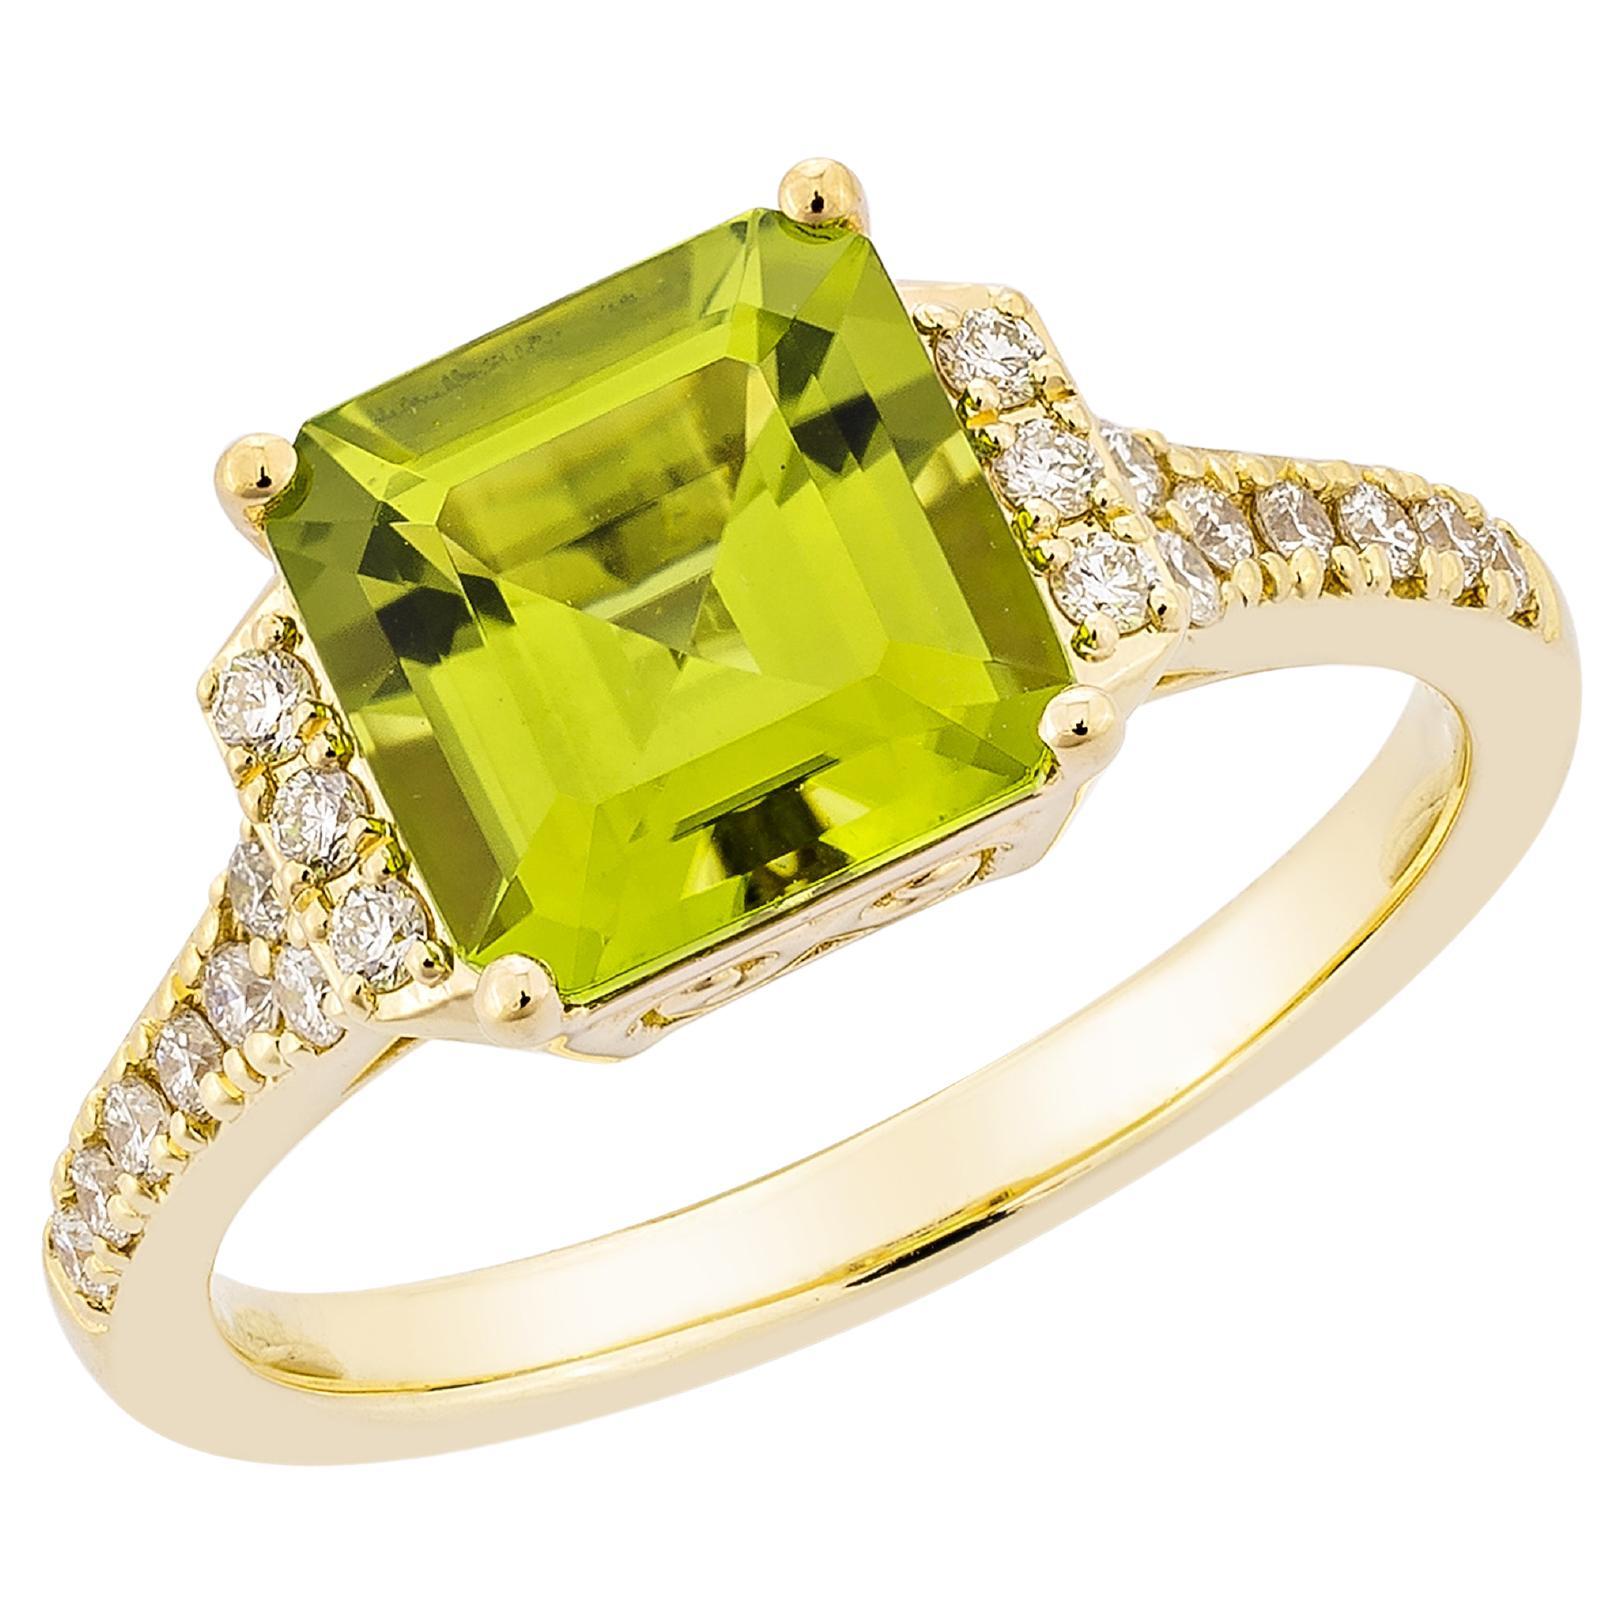 2.58 Carat Peridot Fancy Ring in 18 Karat Yellow Gold with White Diamond.   For Sale